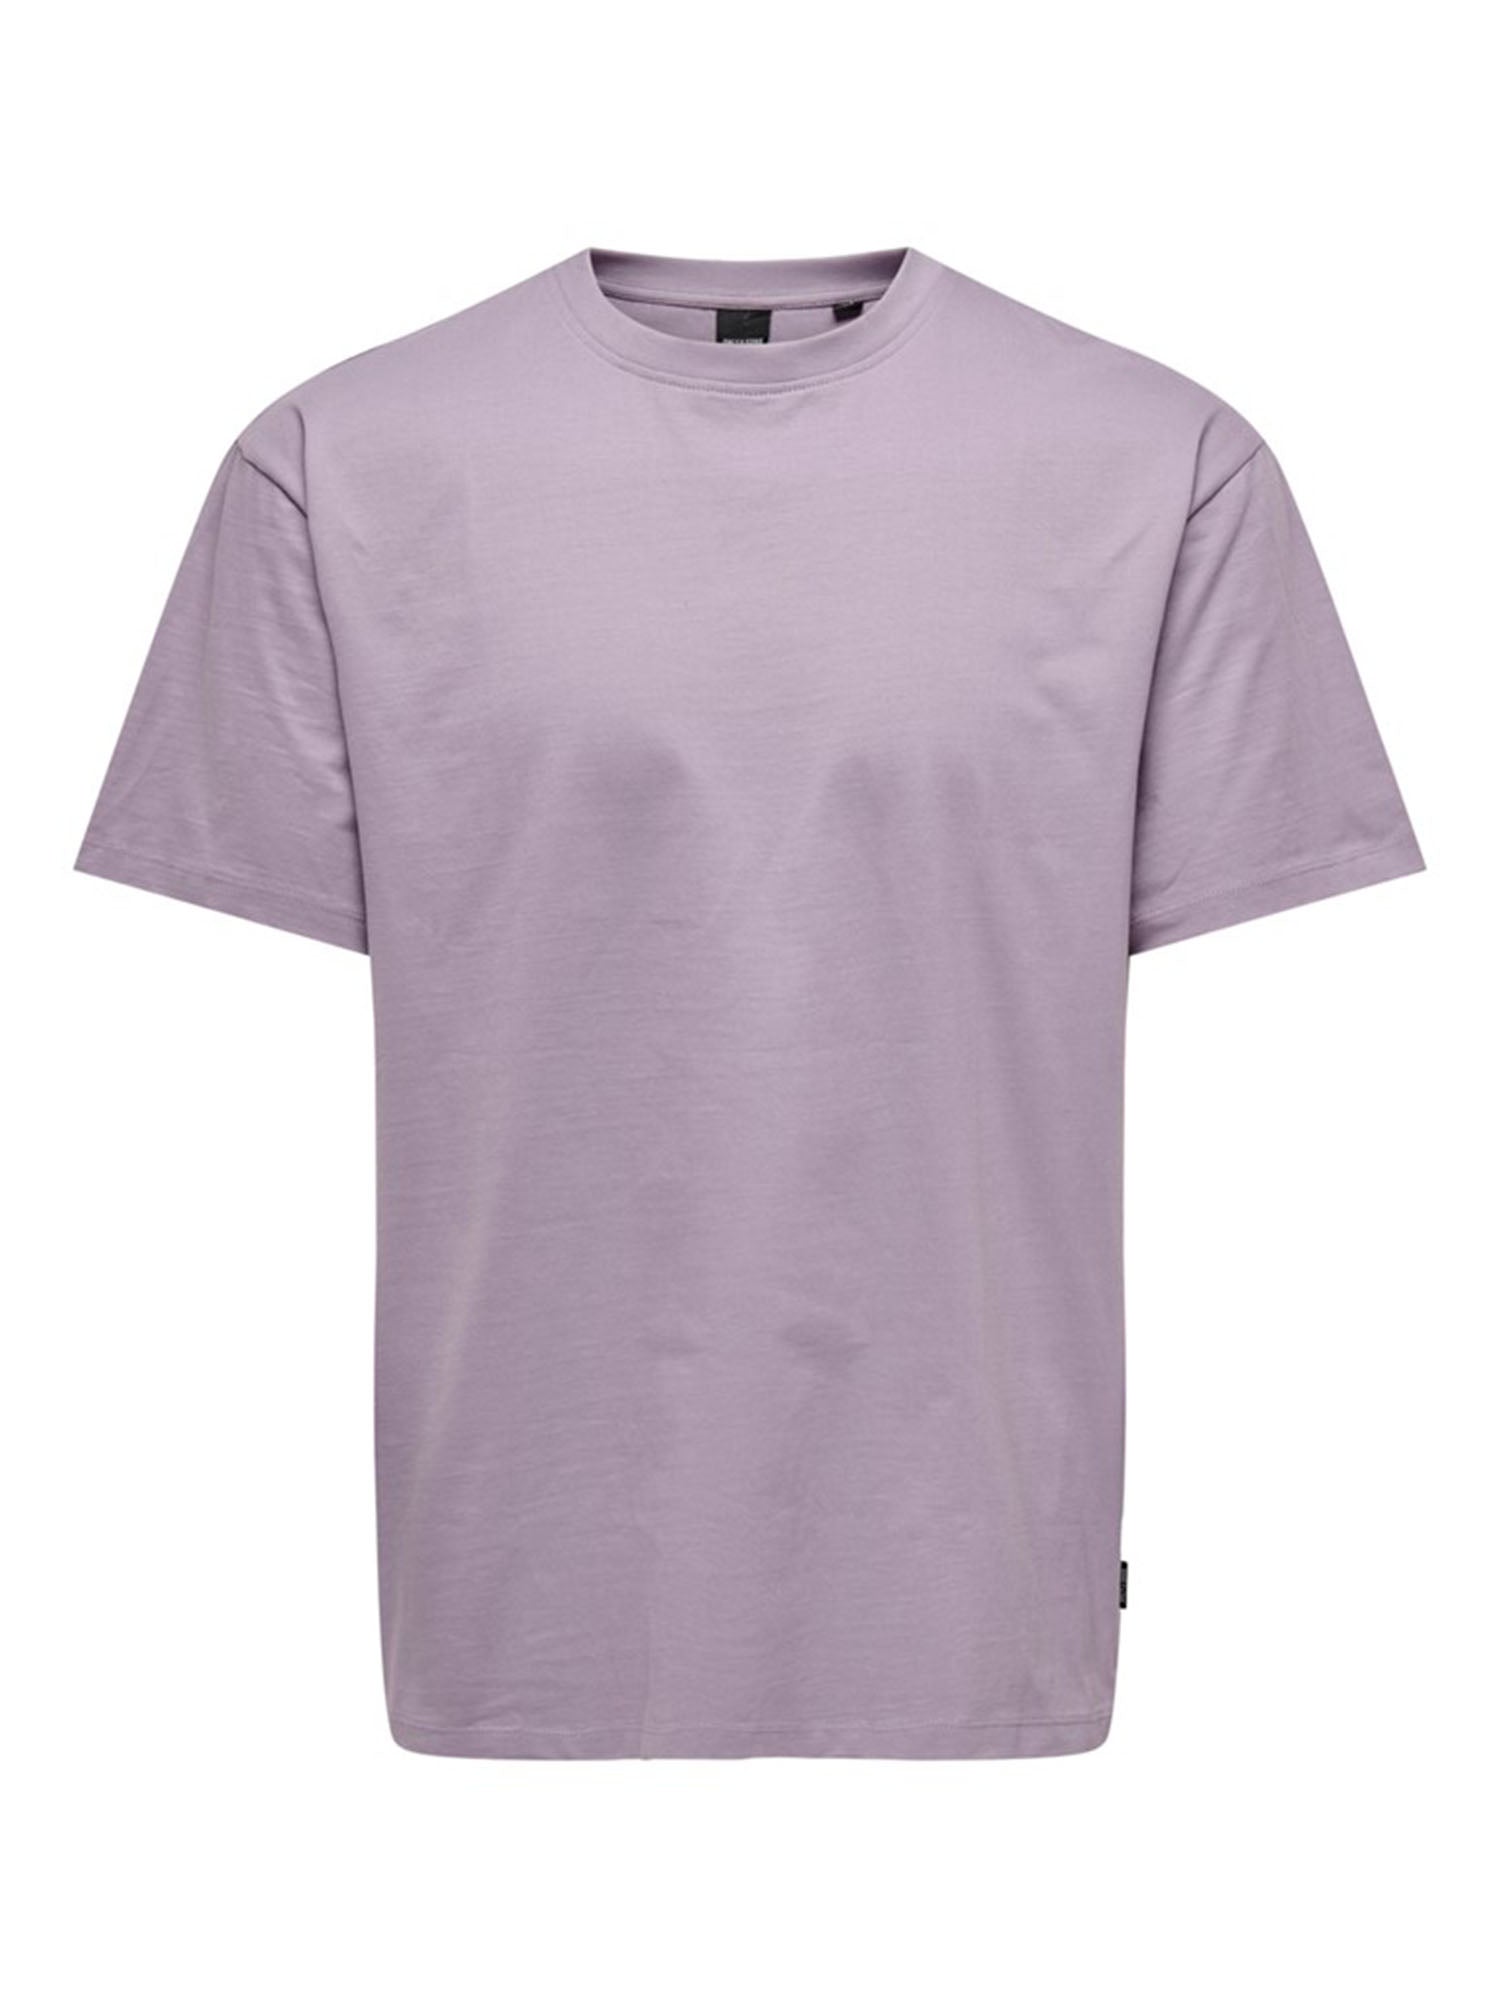 ONLY&SONS T-SHIRT FRED LILLA